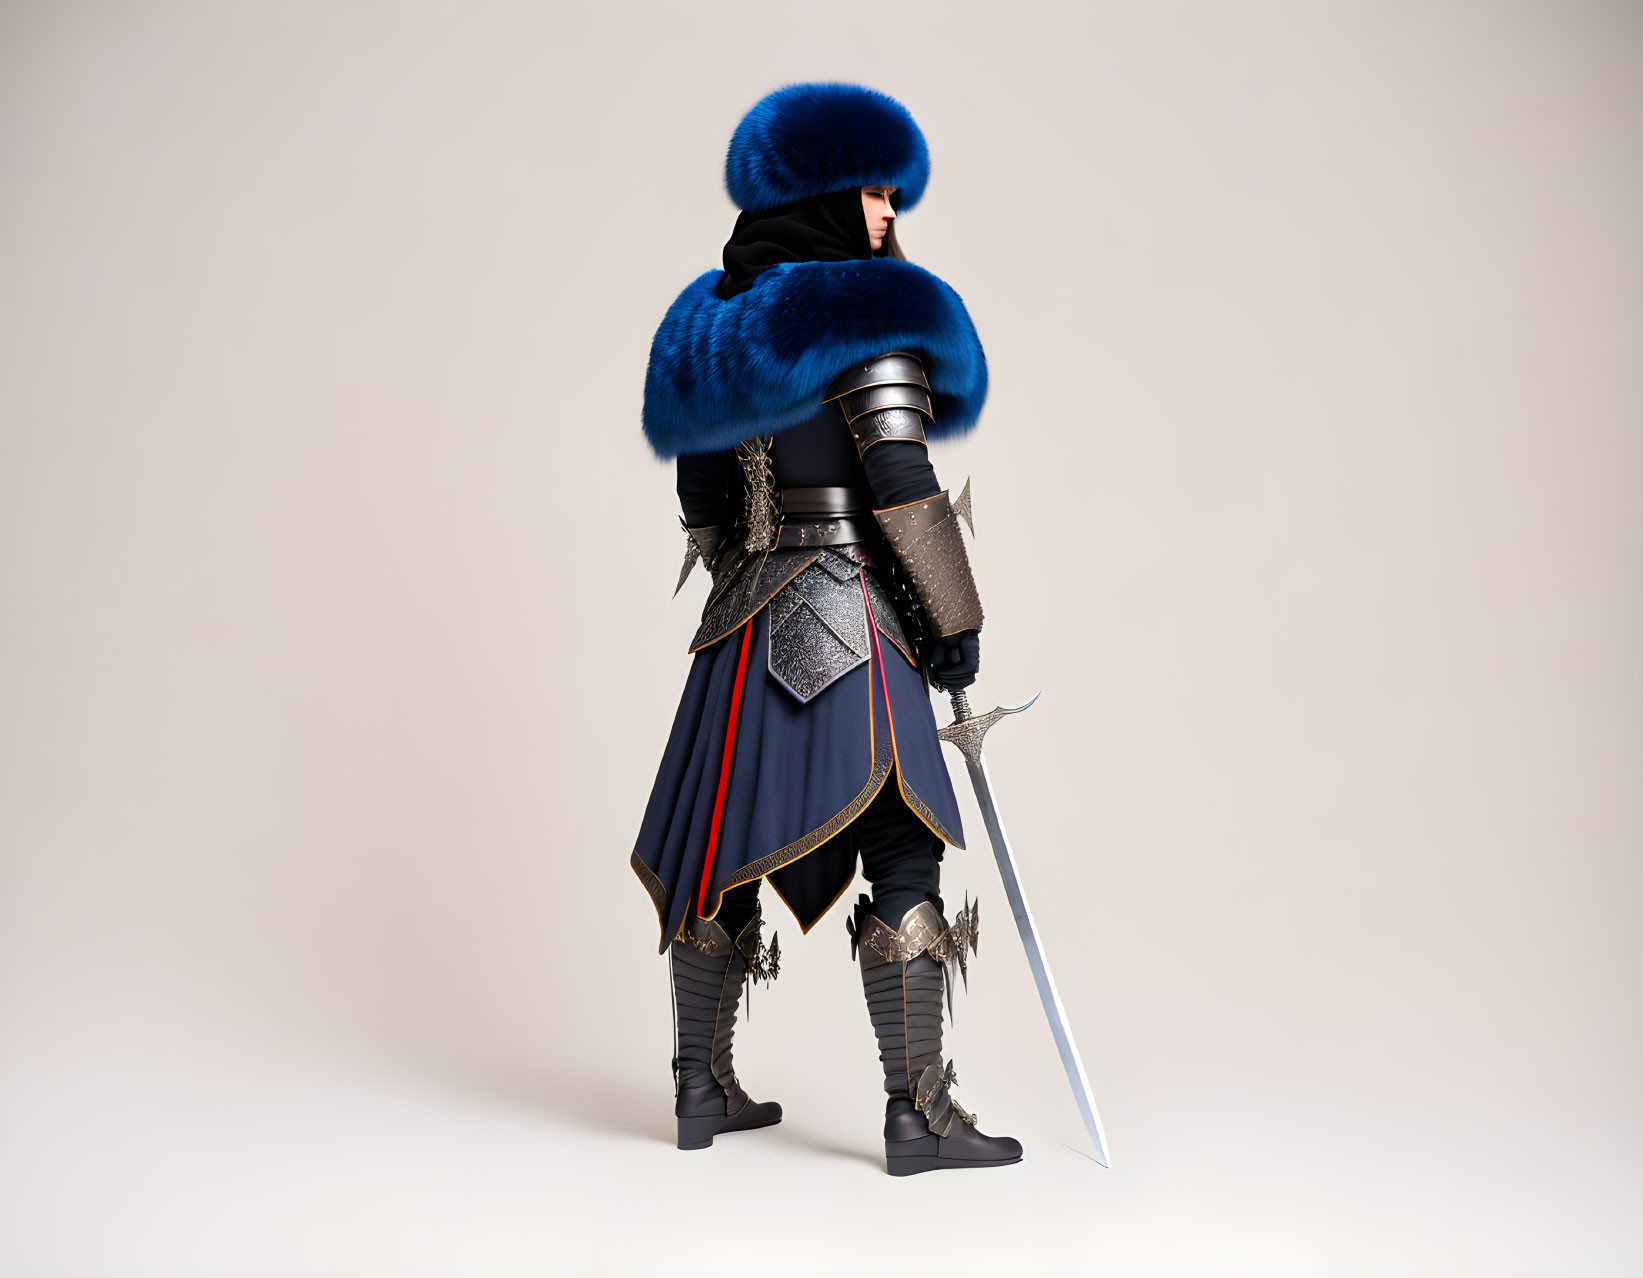 Medieval knight in blue fur mantle with sword on neutral background